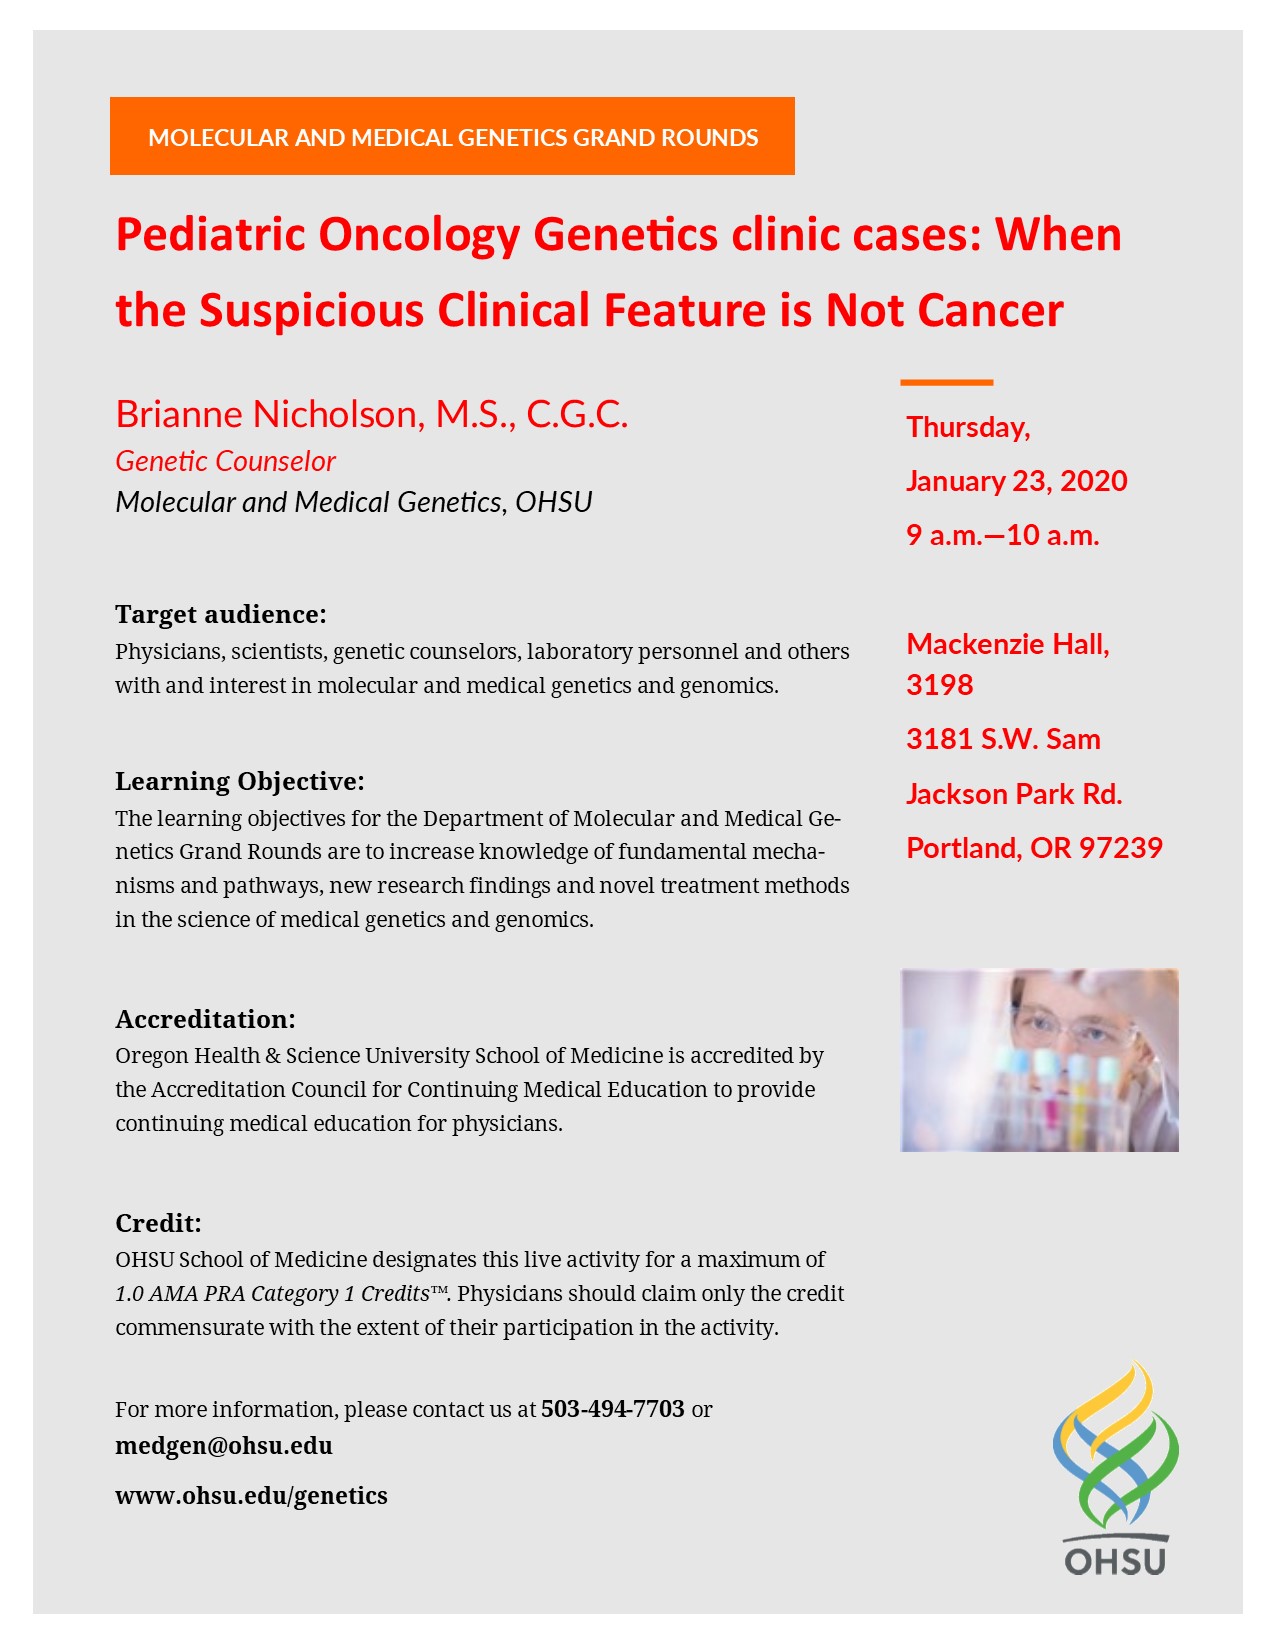 Pediatric Oncology Genetics clinic cases: When the Suspicious Clinical Feature is Not Cancer